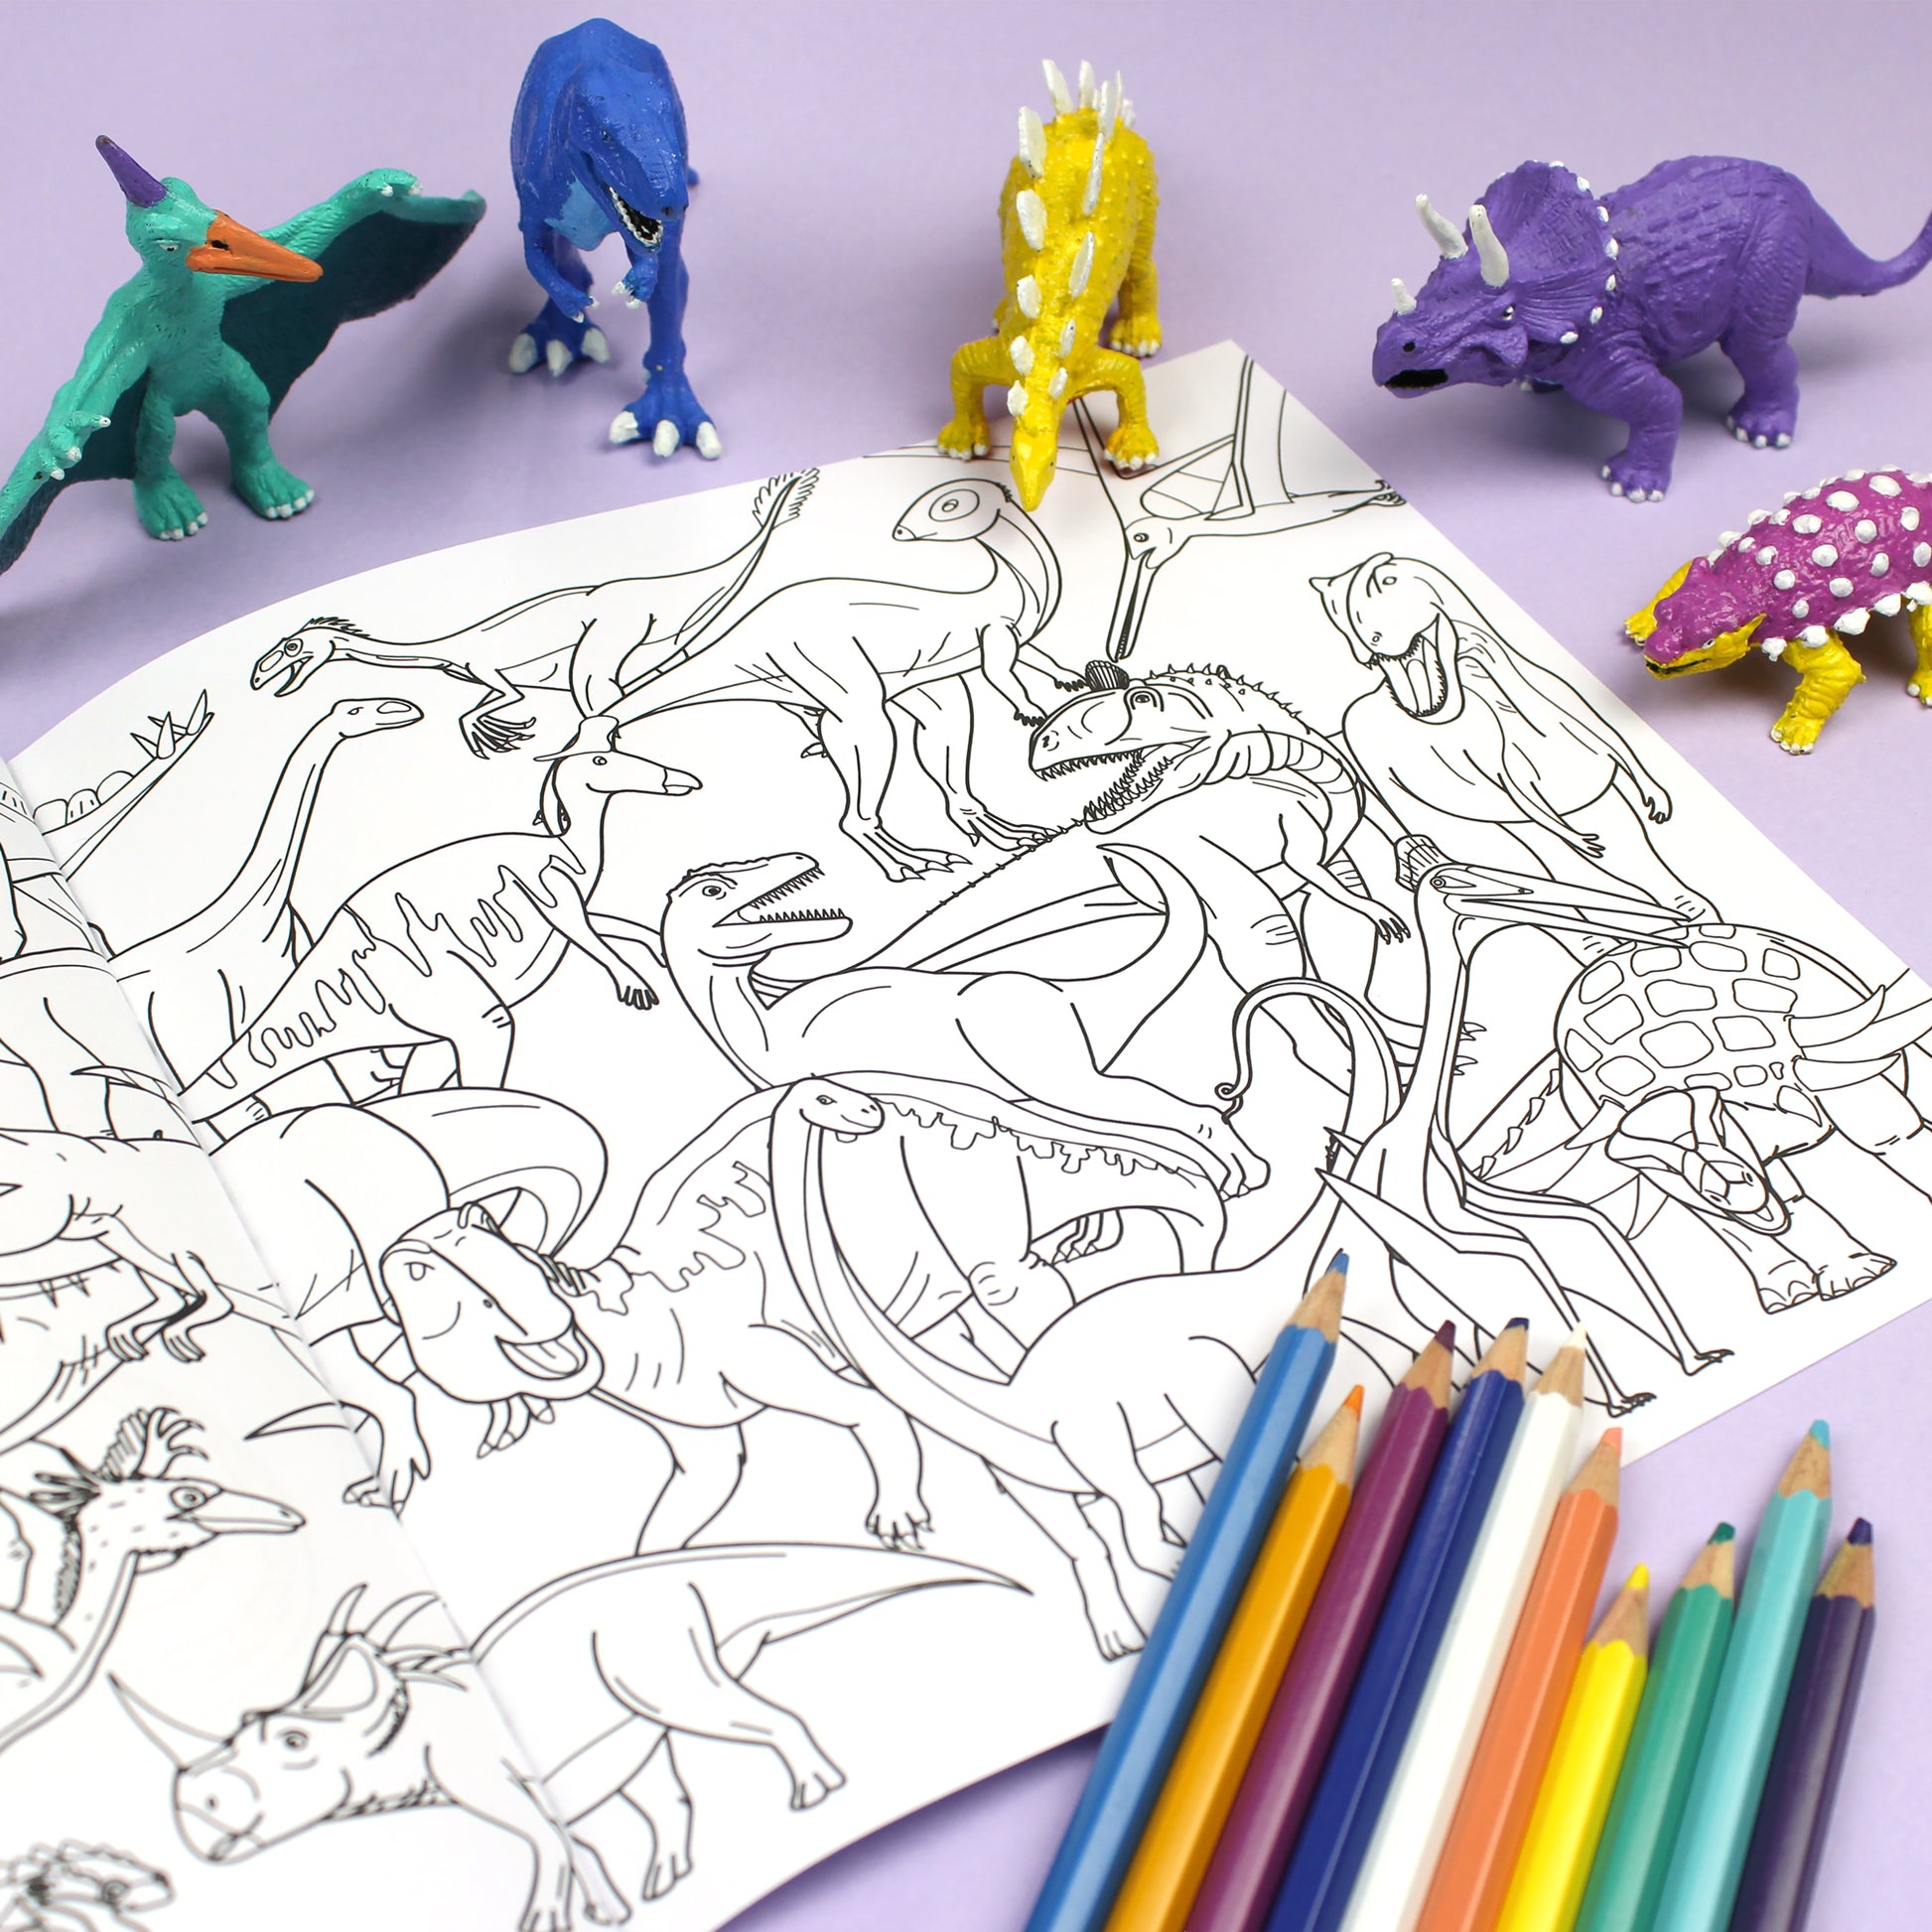 Inside page of ABC Dinosaur colouring book. The page features black line illustration of a collage of dinosaurs featured in the colouring book.